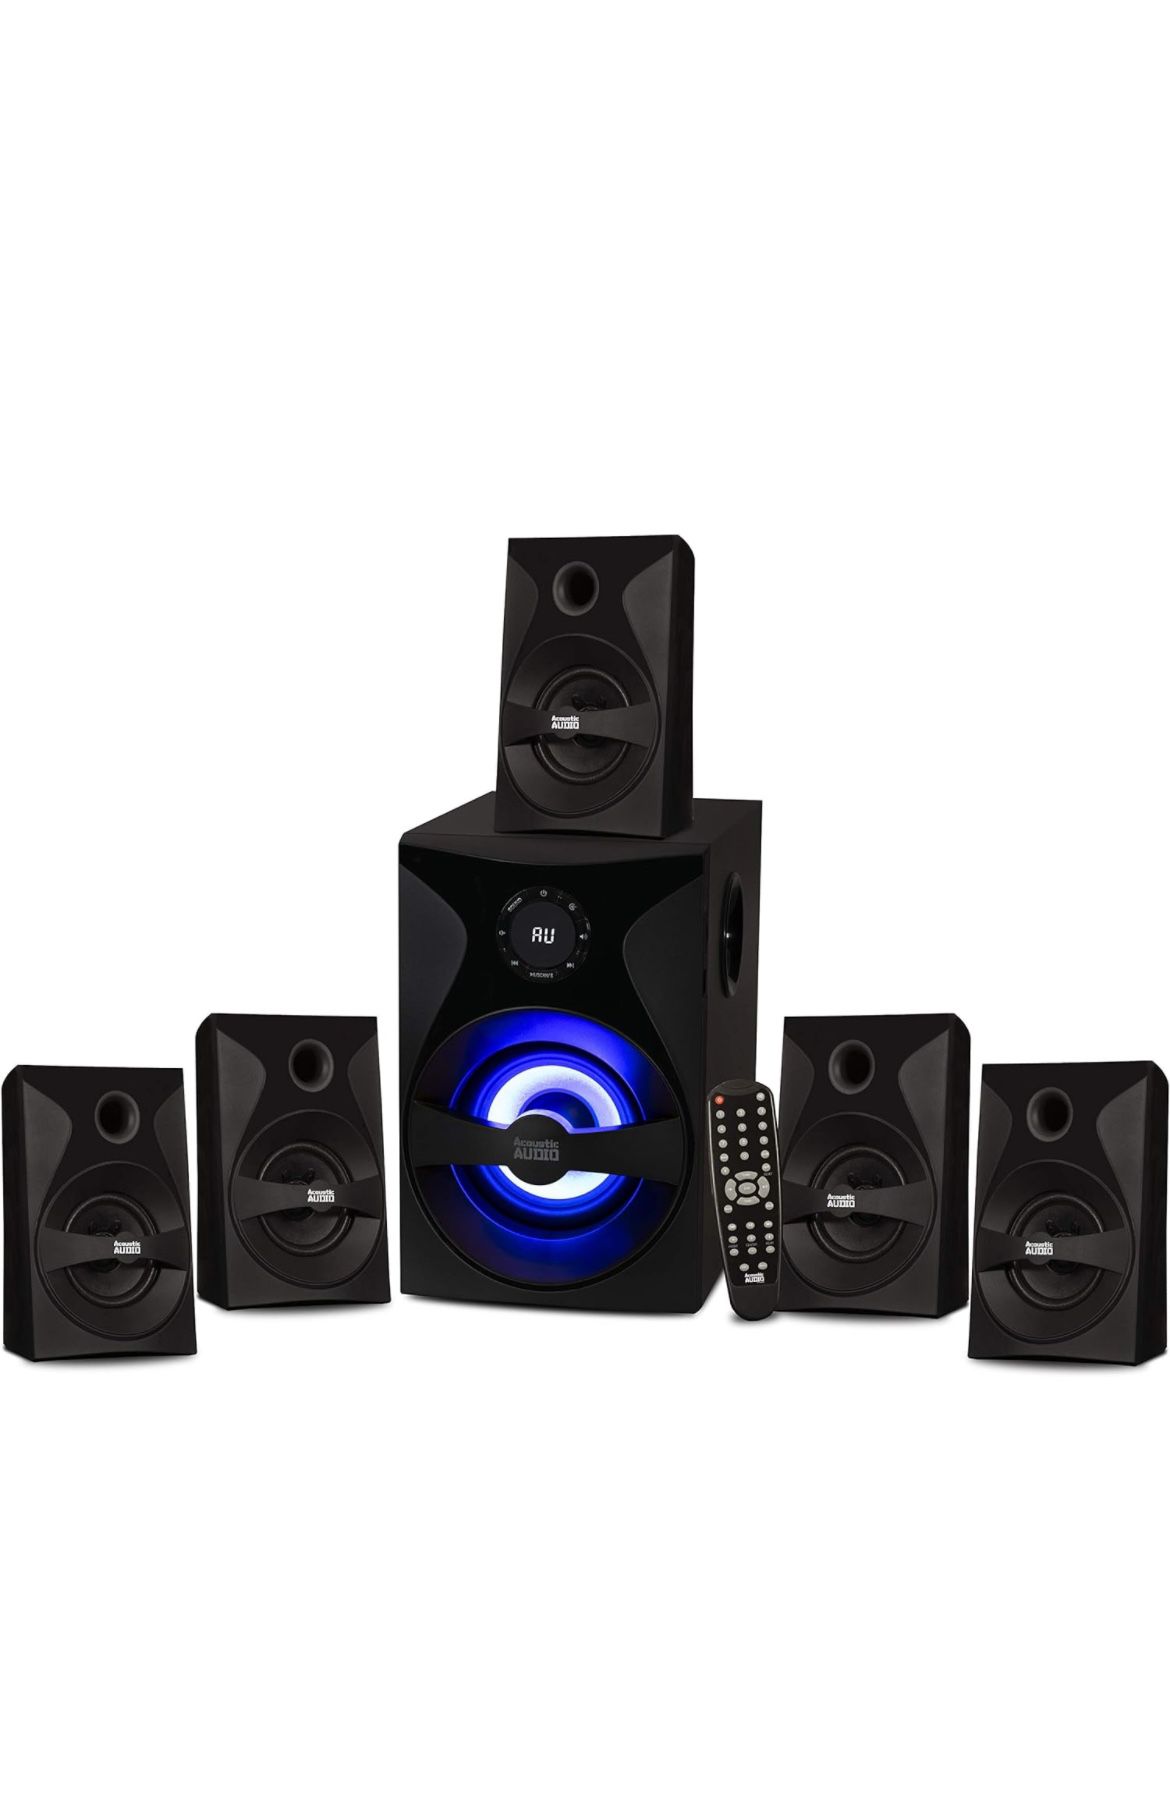 Goldwood Bluetooth 5.1 Surround Sound Home Theater Speaker System with LED Display, FM Tuner, USB/SD Inputs - 6-Piece Set with Remote Control, Black